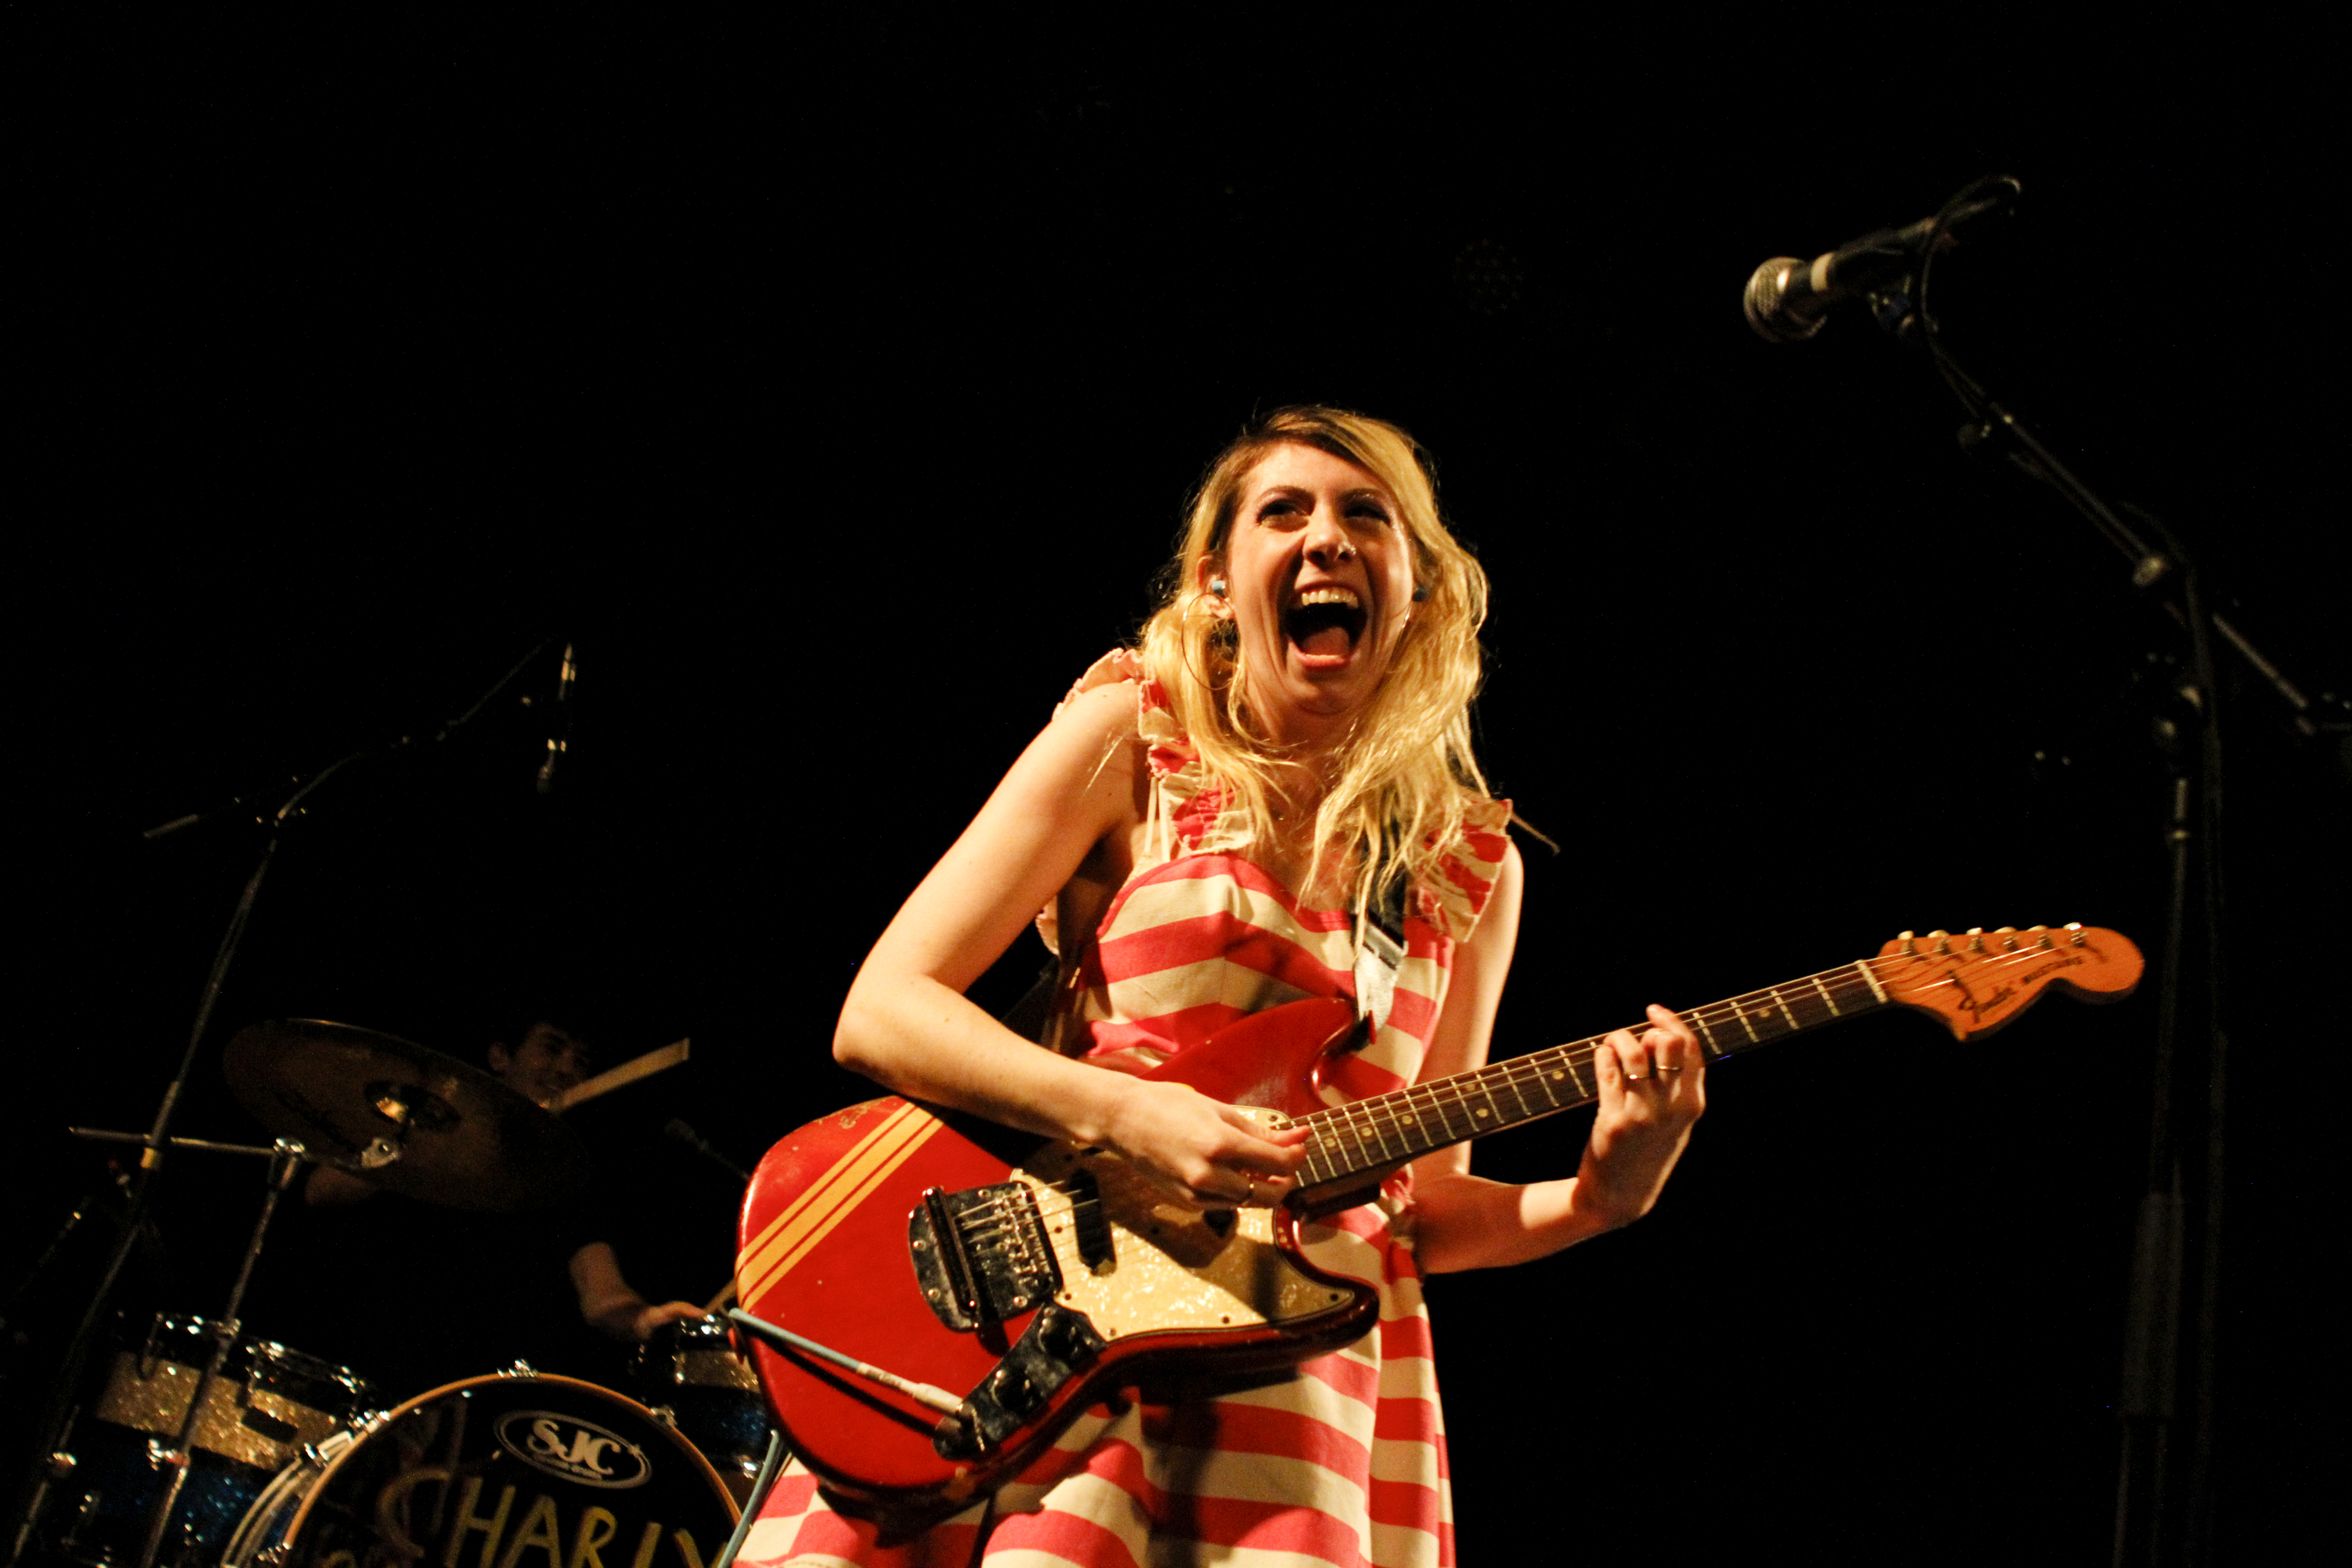 Charly Bliss plays at Music Hall of Williamsburg in Brooklyn, New York on Sept. 28, 2017. (© Michael Katzif - Do not use or republish without prior consent.)